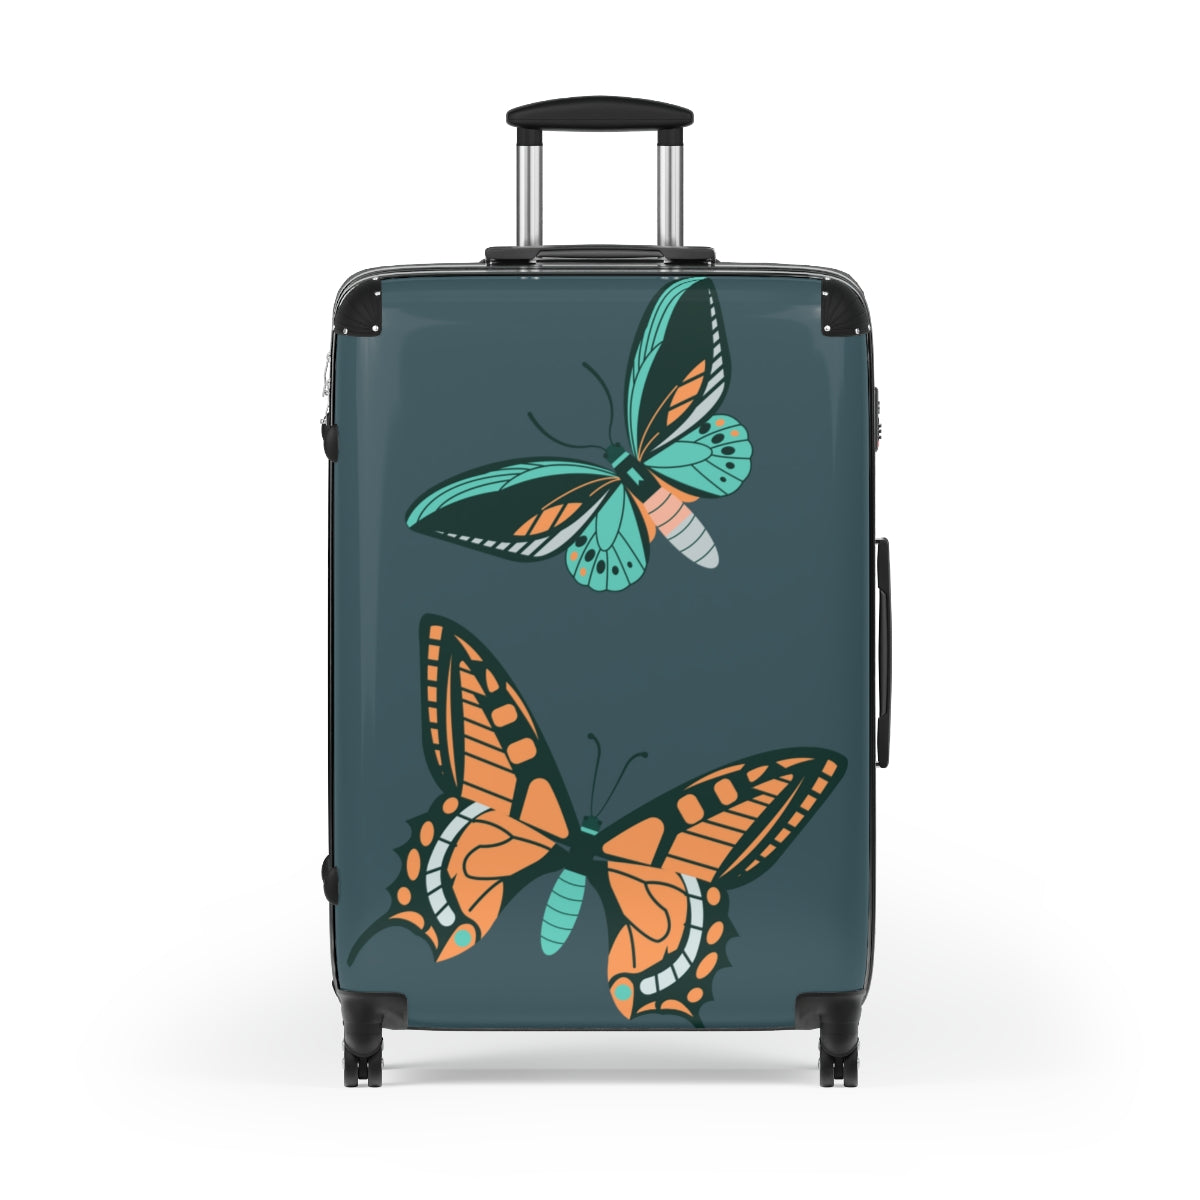 BUTTERFLY SUITCASE SET ARTZIRA, Cabin Suitcase Carry-On Luggage, Trolly Travel Bags Double Wheeled Spinners, Men's Choice